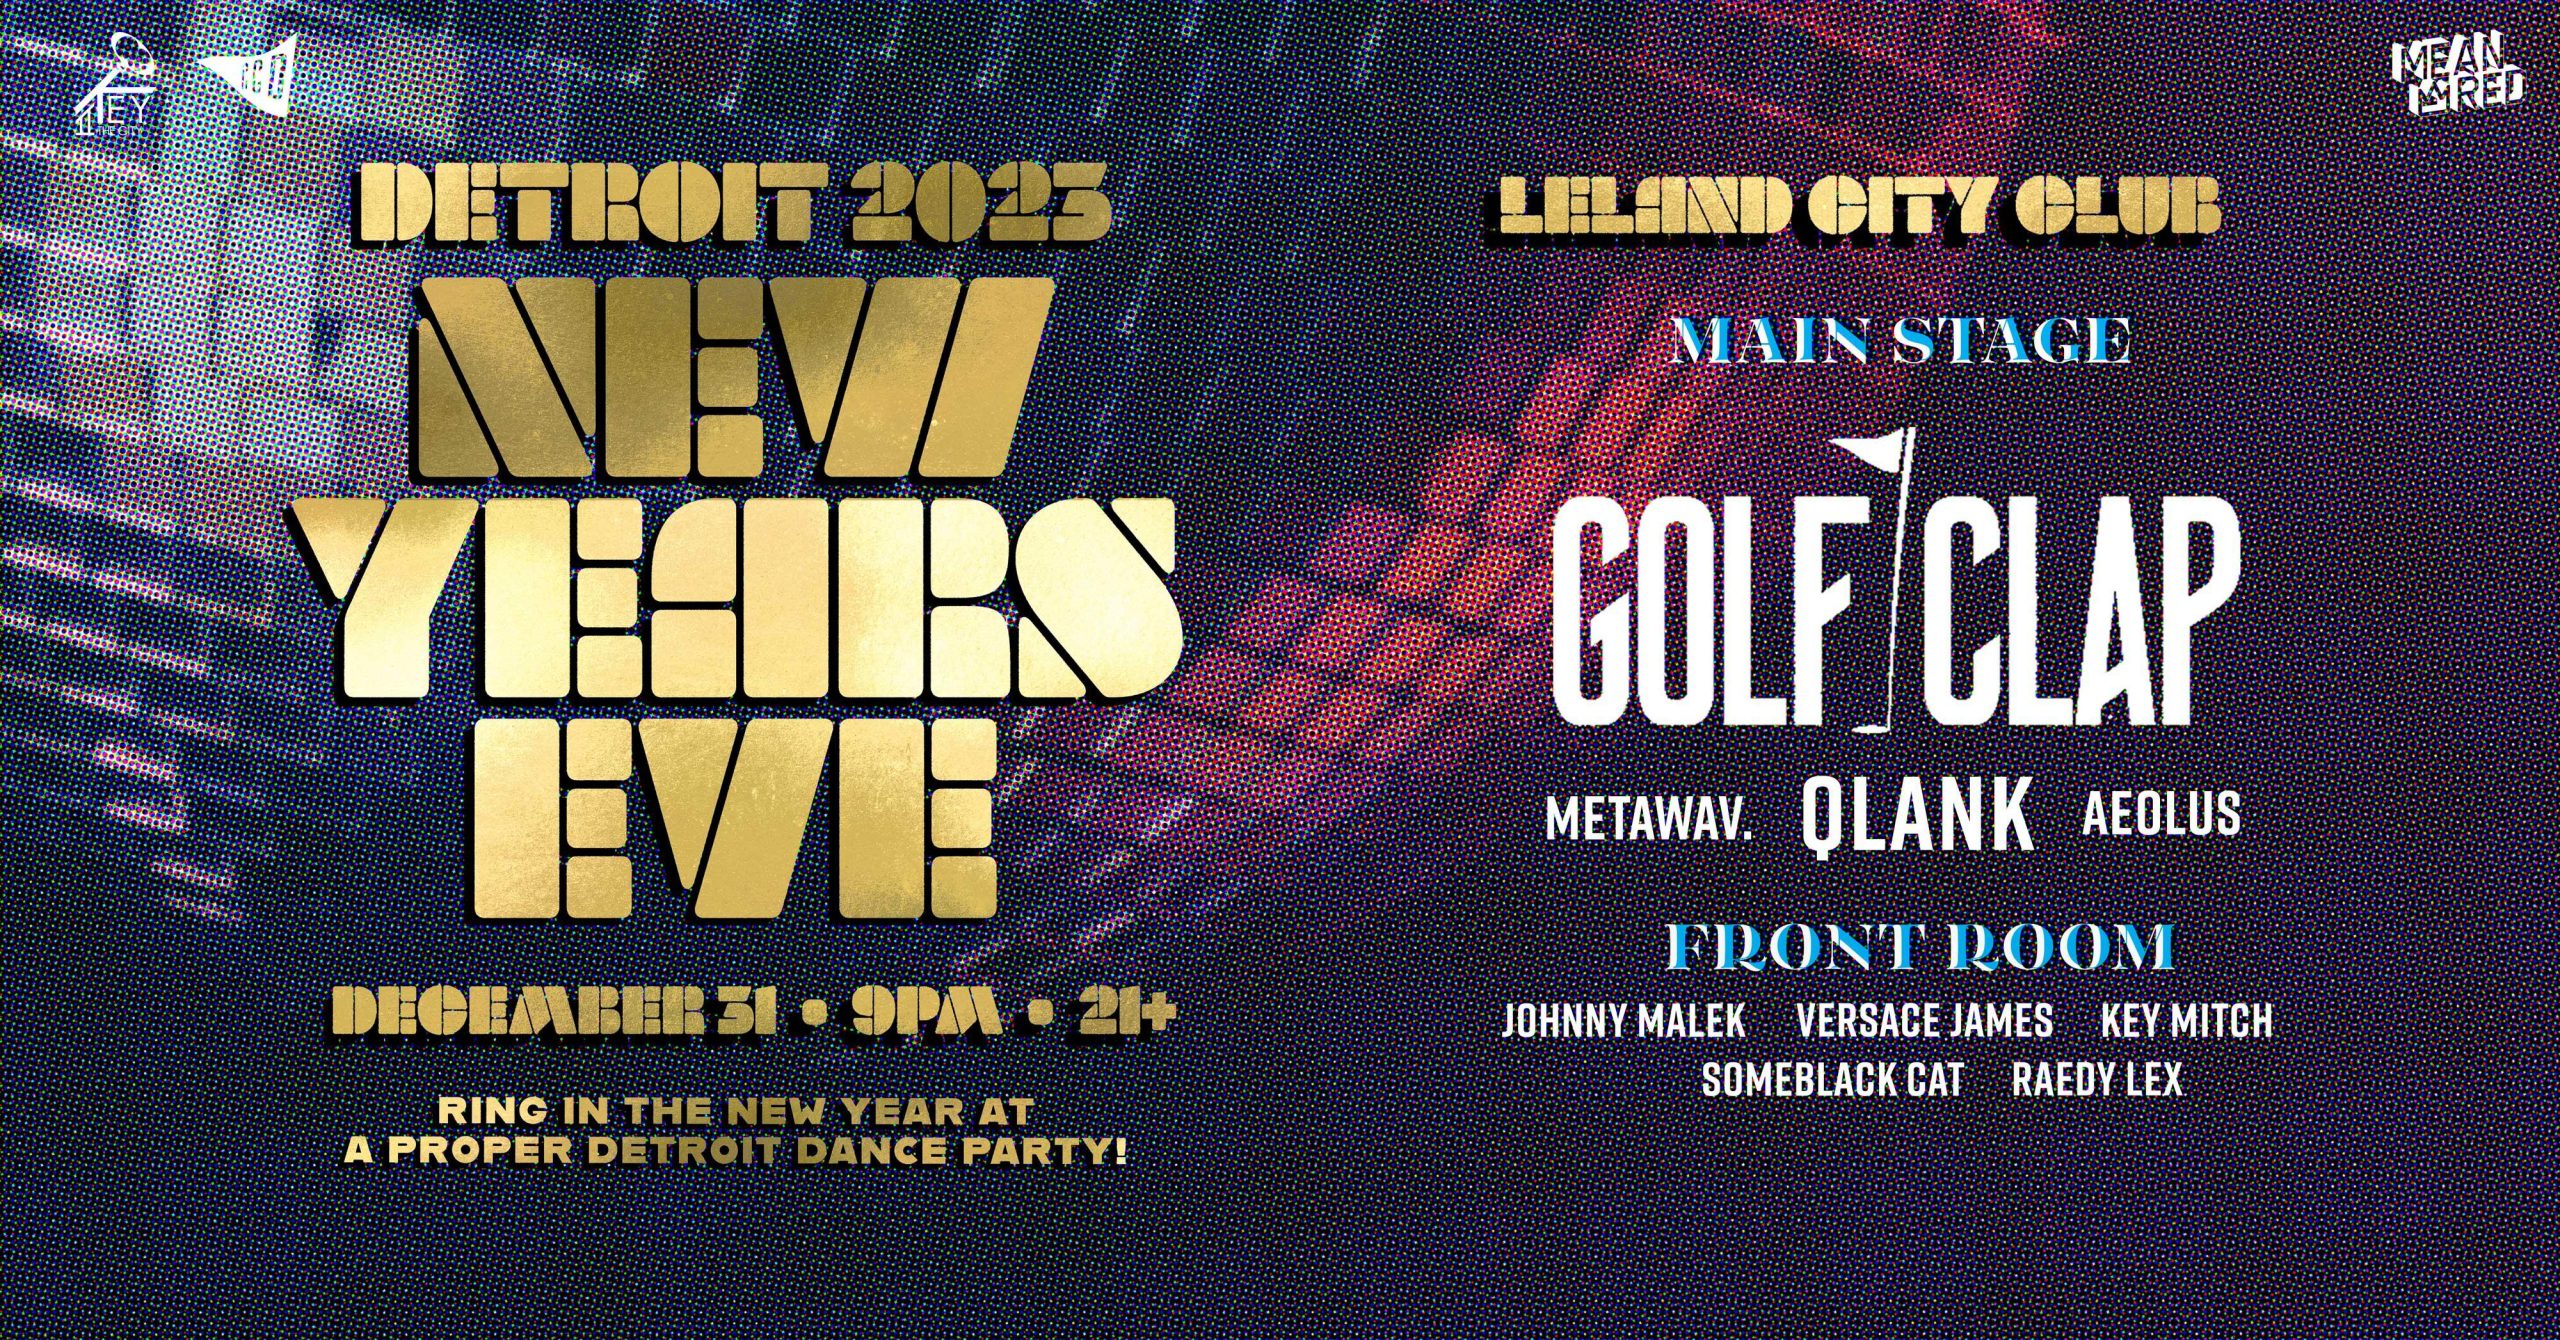 New Years Eve at Leland City Club: Golf Clap and Friends